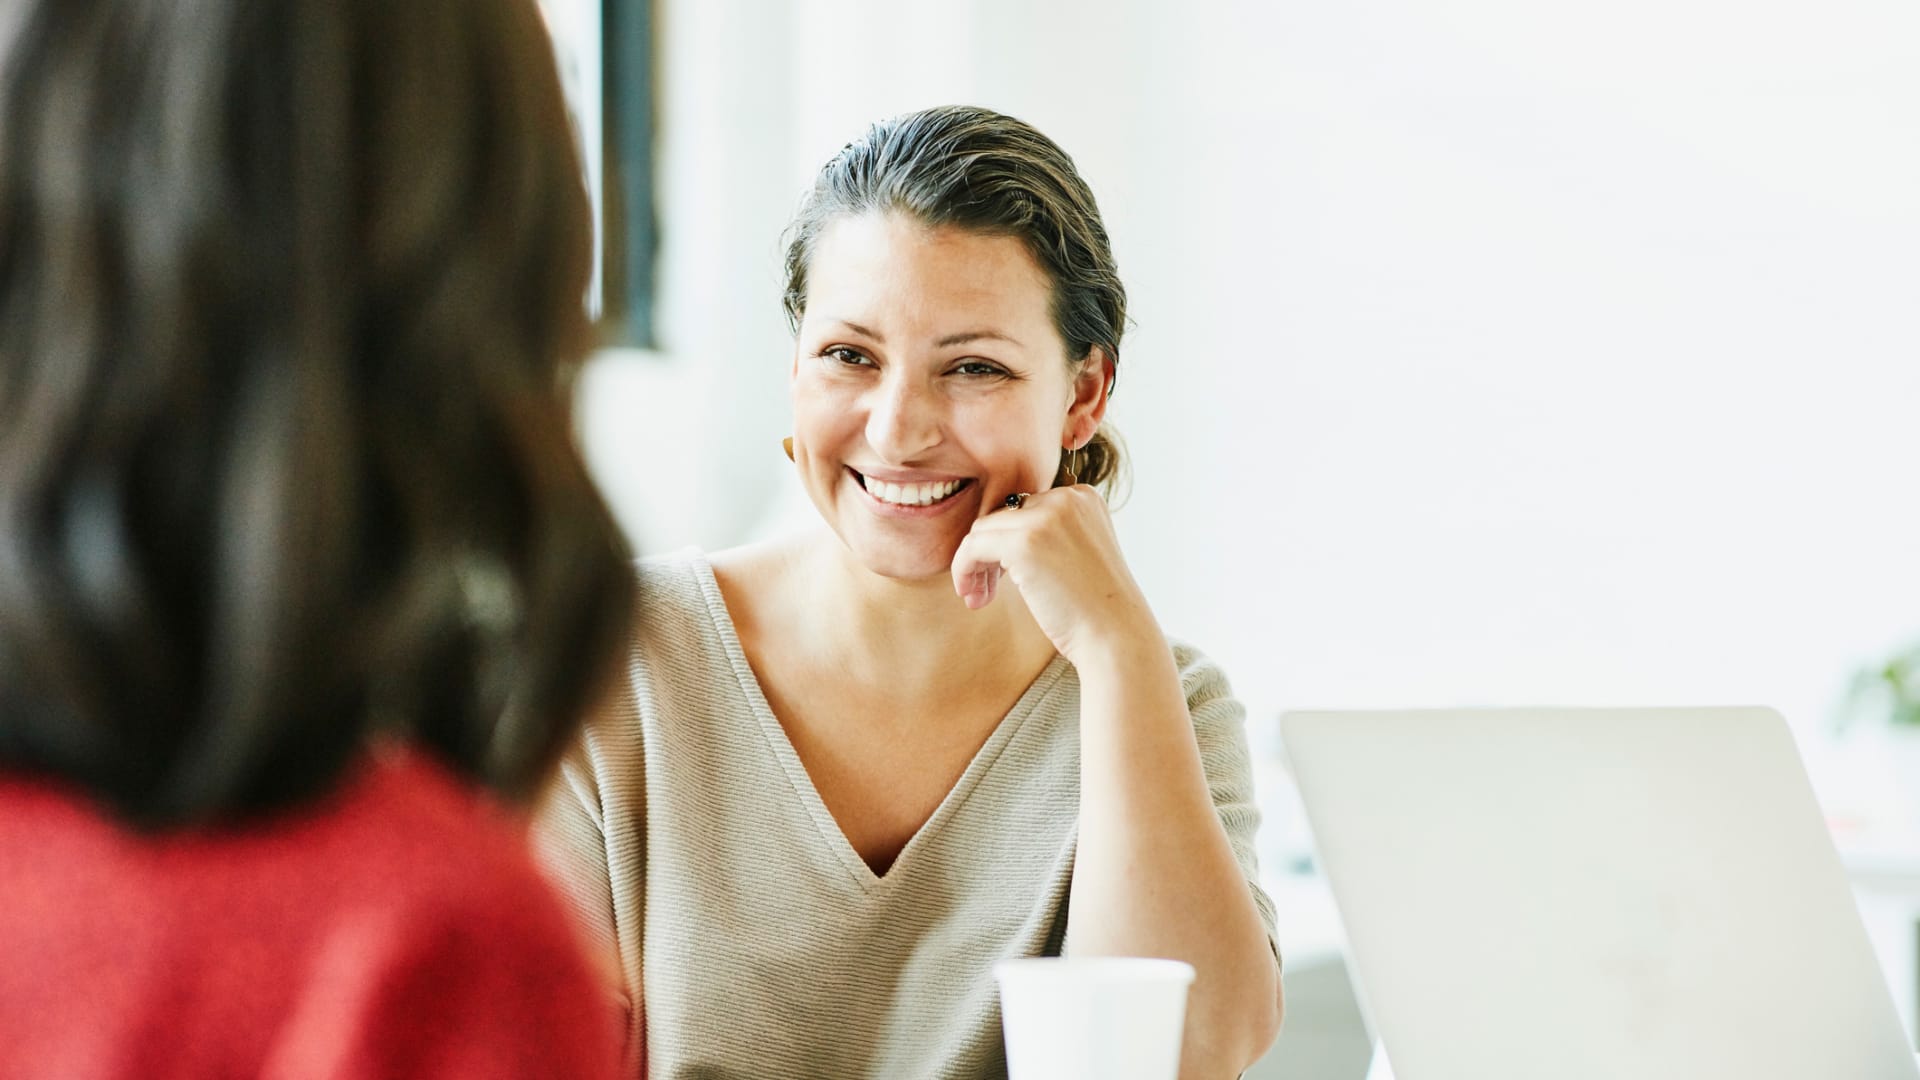 3 Questions to Skip Small Talk and Build Real Connections